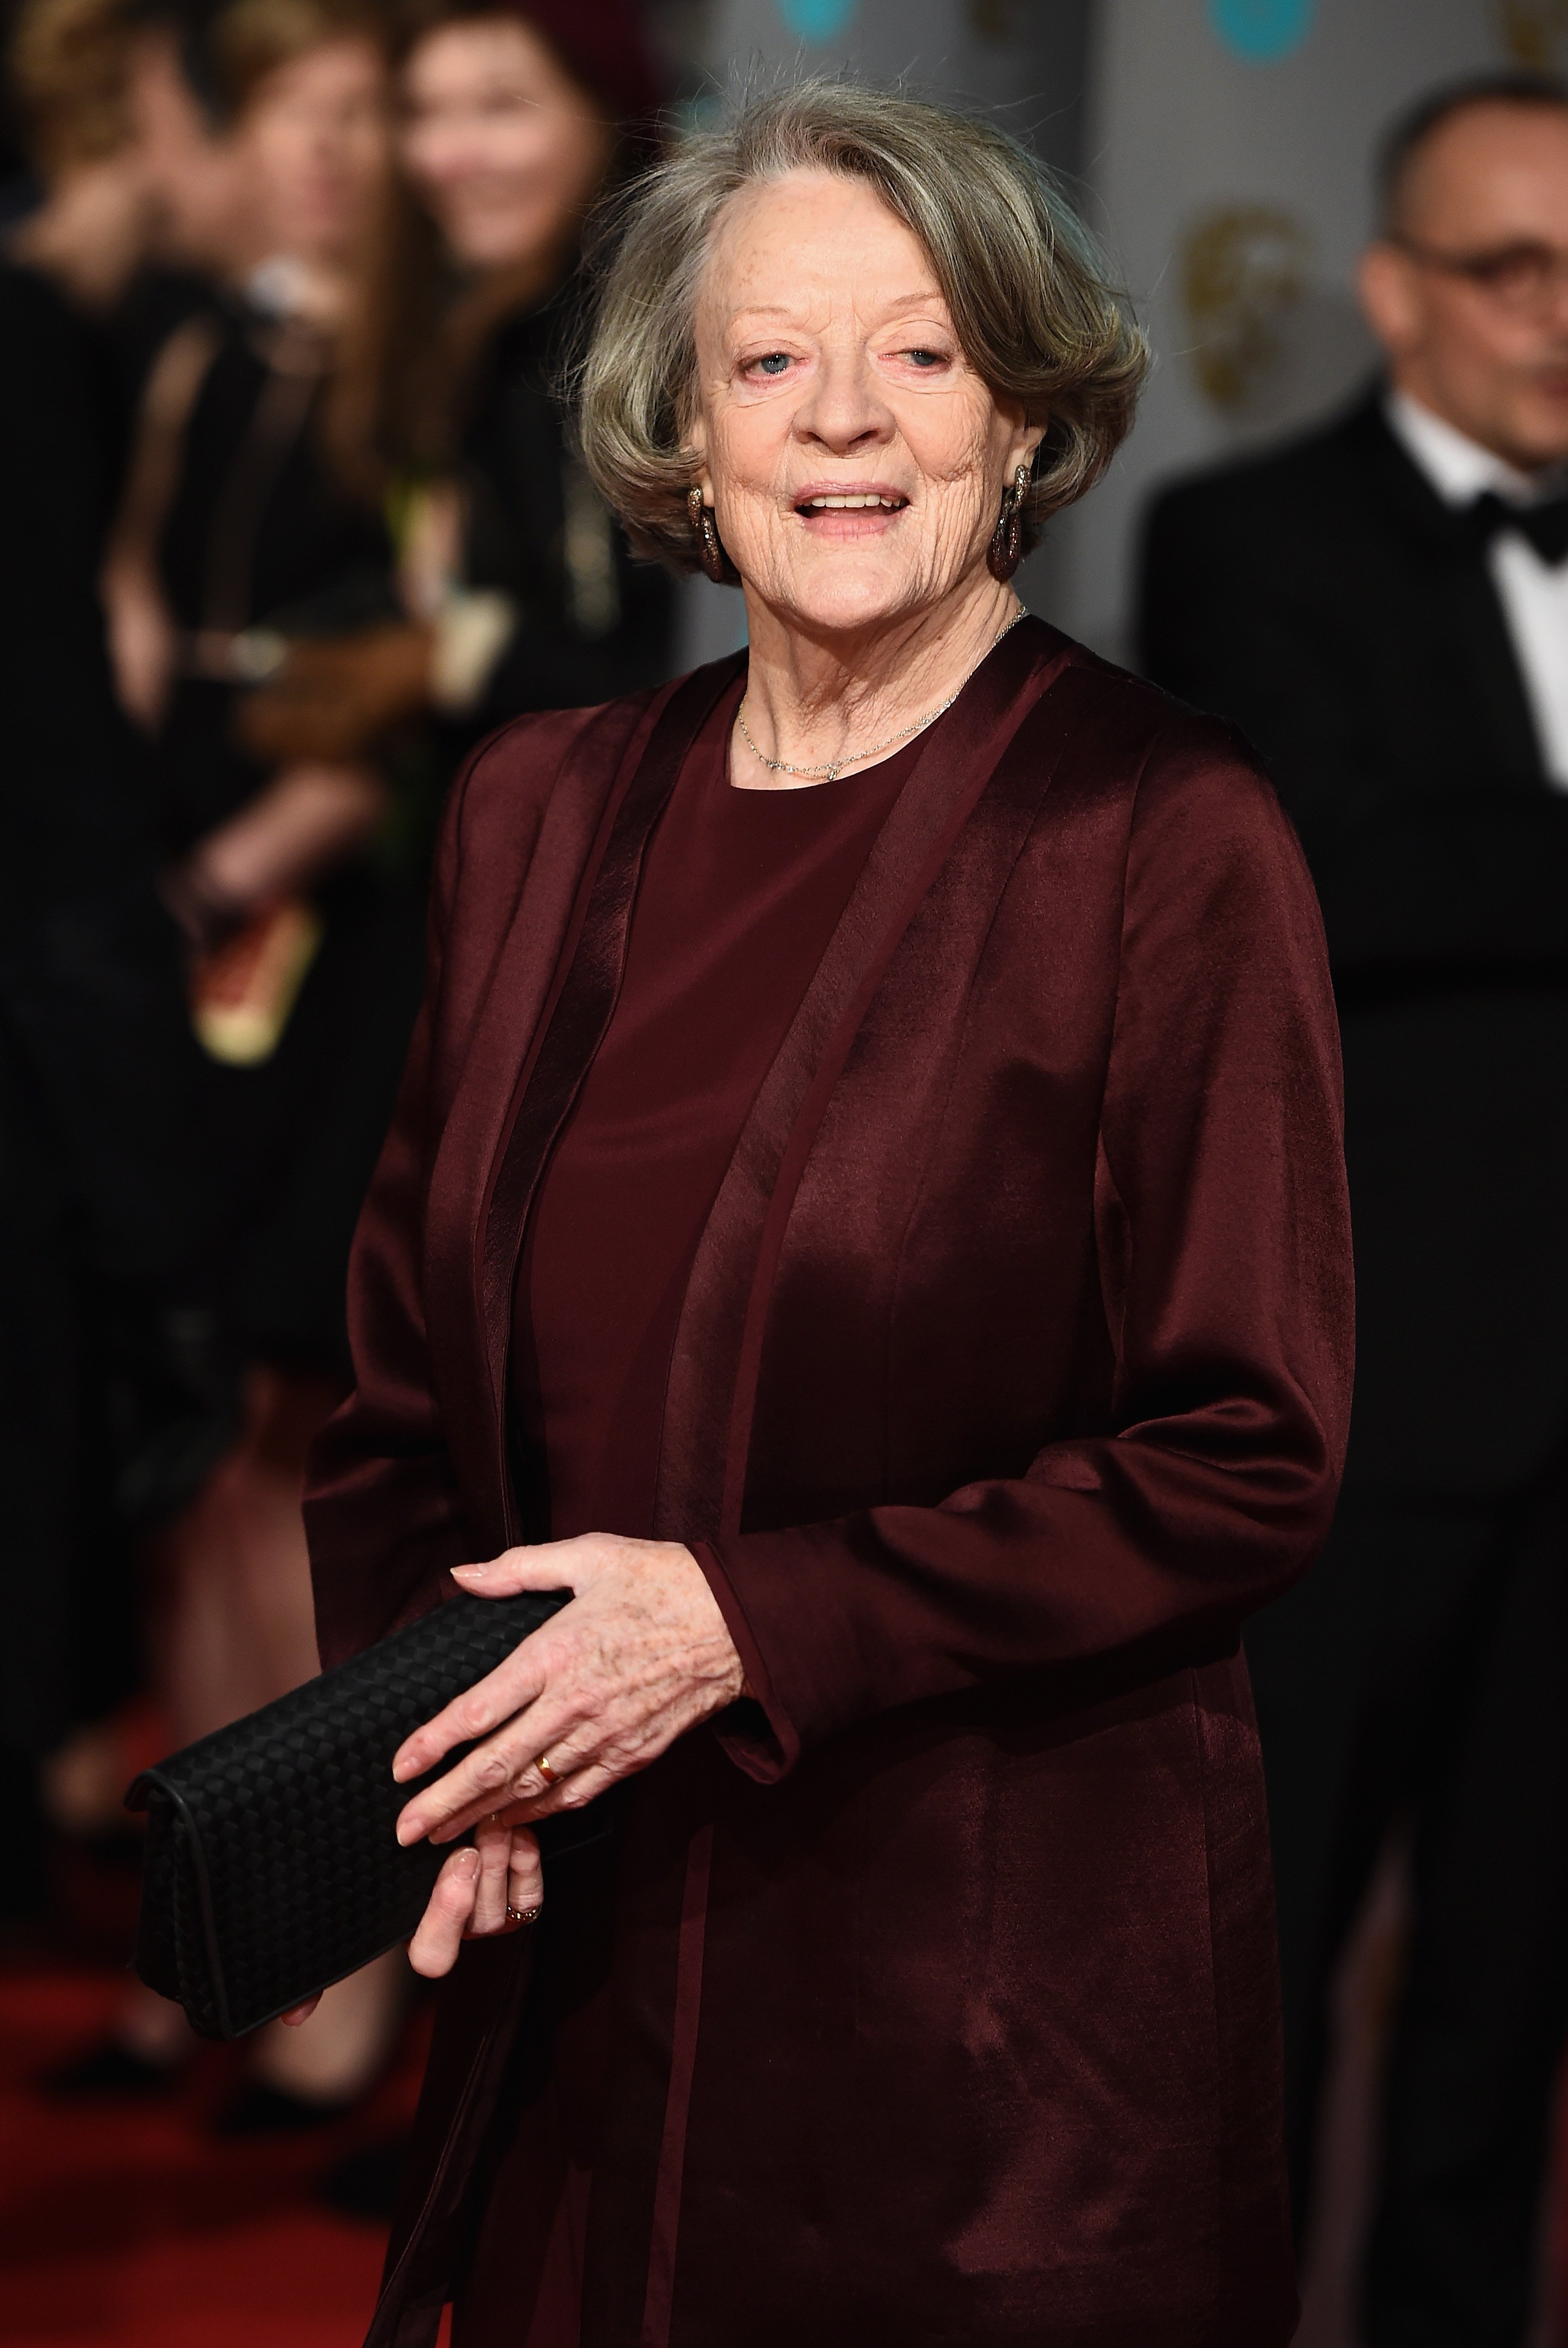  Maggie Smith attends the EE British Academy Film Awards on February 14, 2016 | Photo: Getty Images